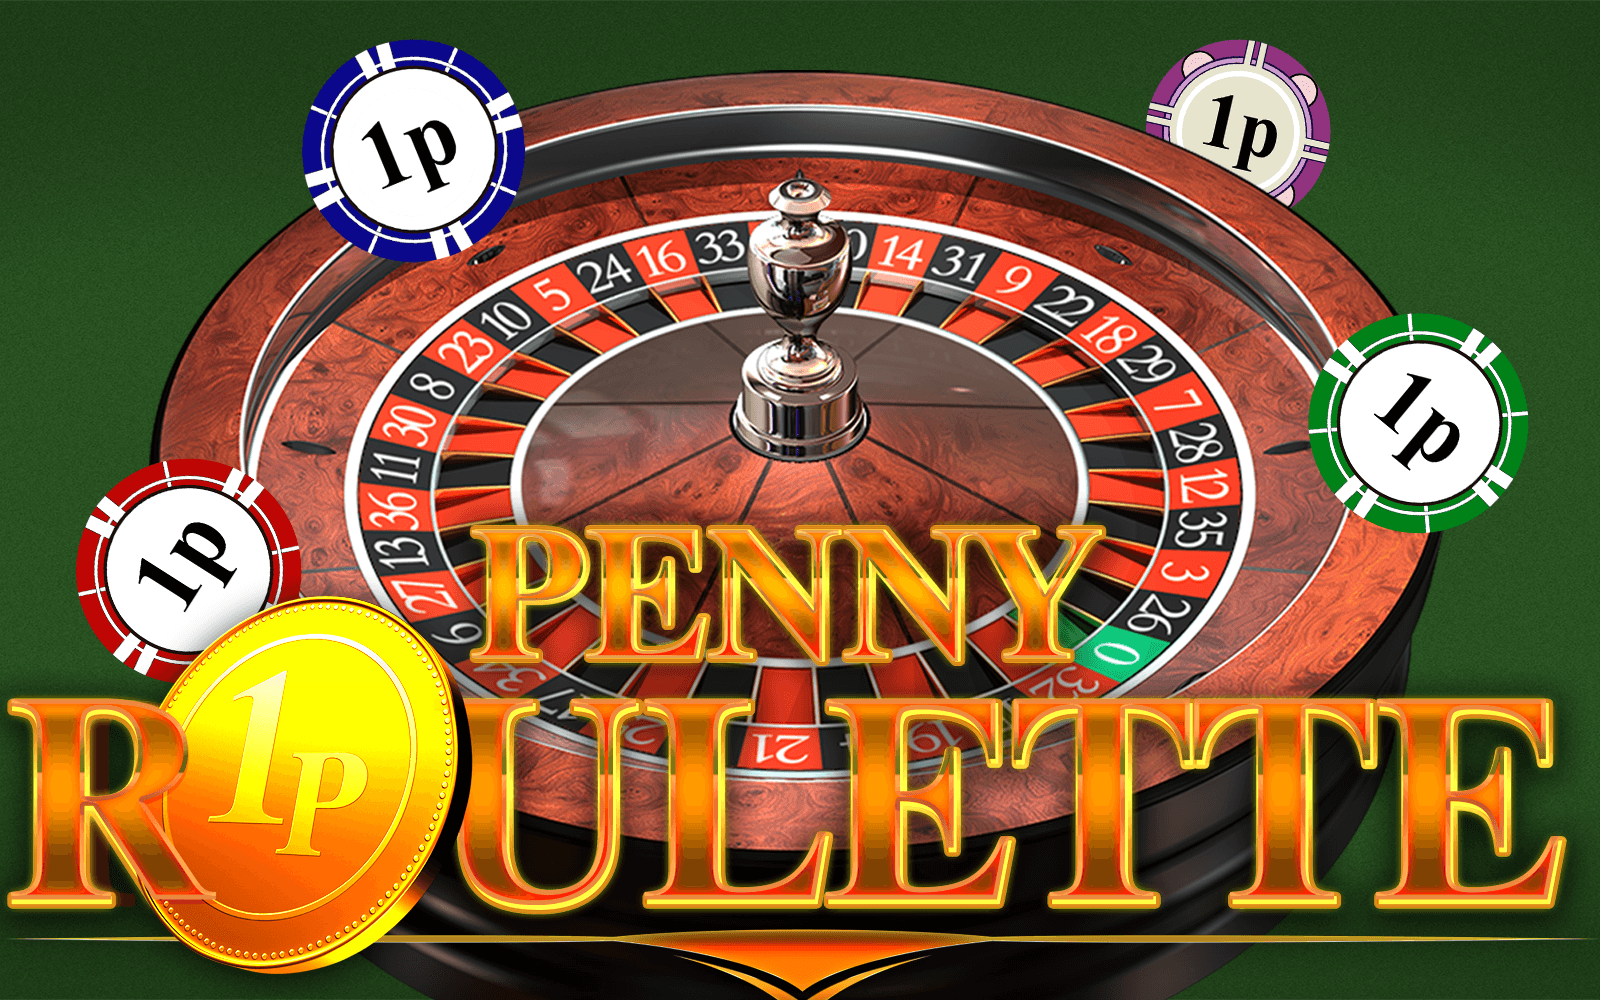 Play Penny Roulette on Starcasino.be online casino